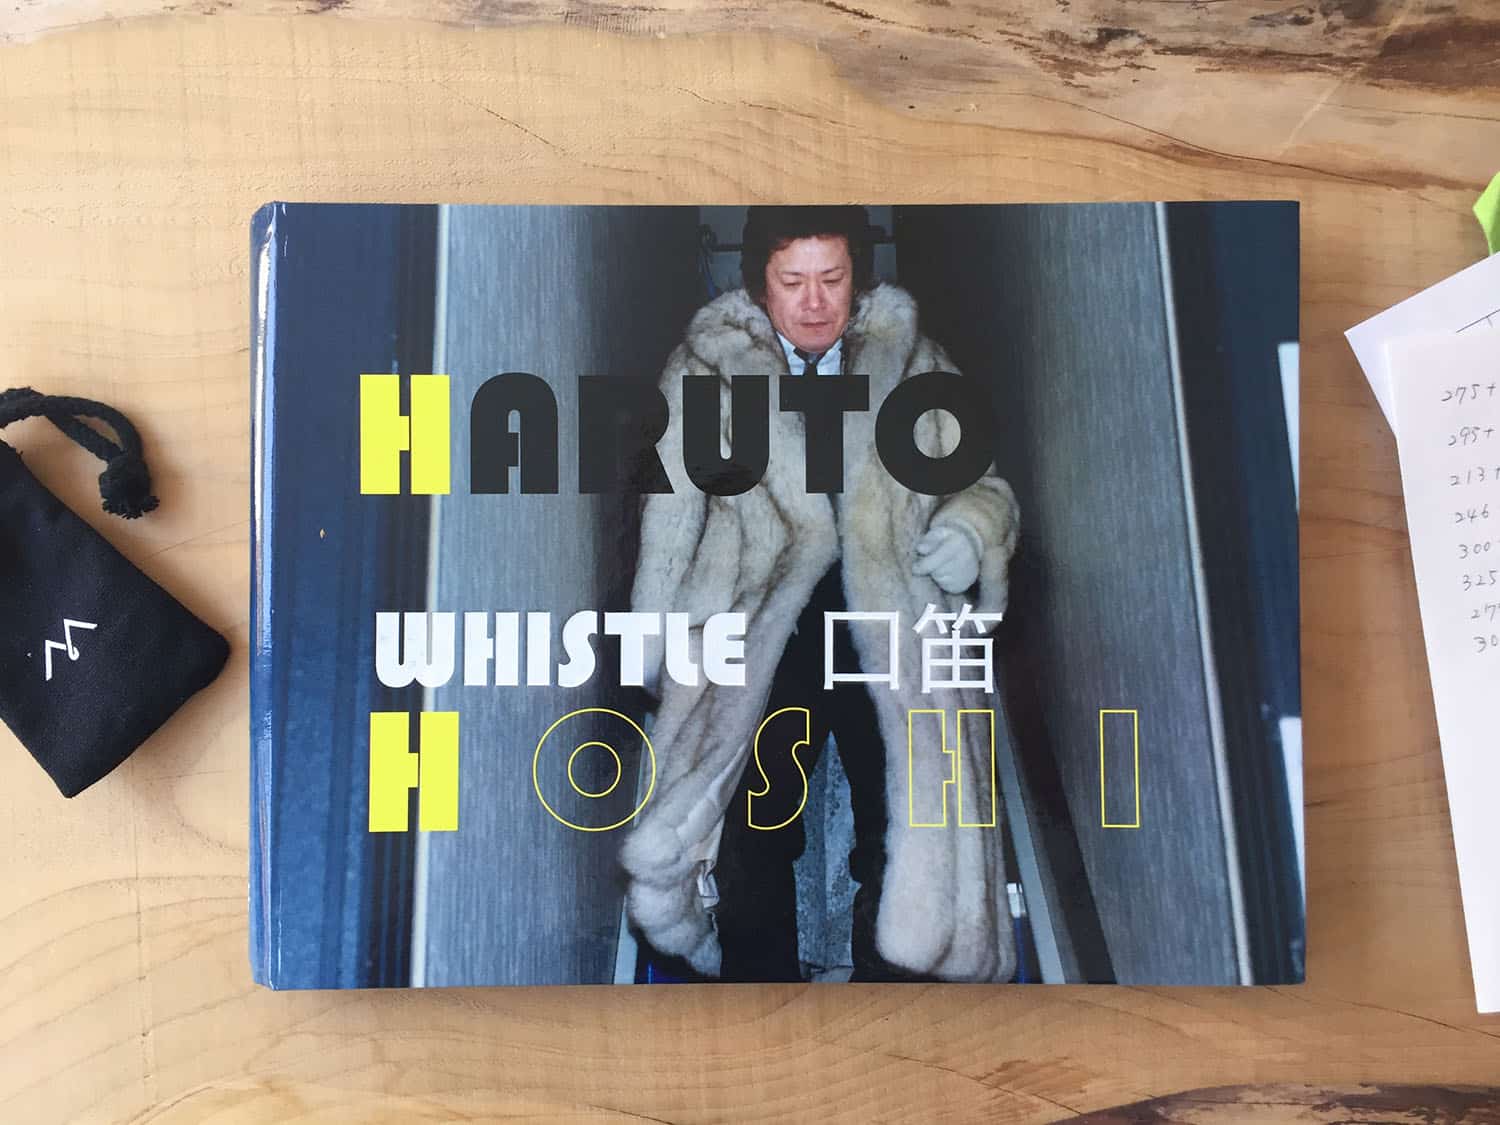 Jesse’s Book Review – Whistle by Haruto Hoshi